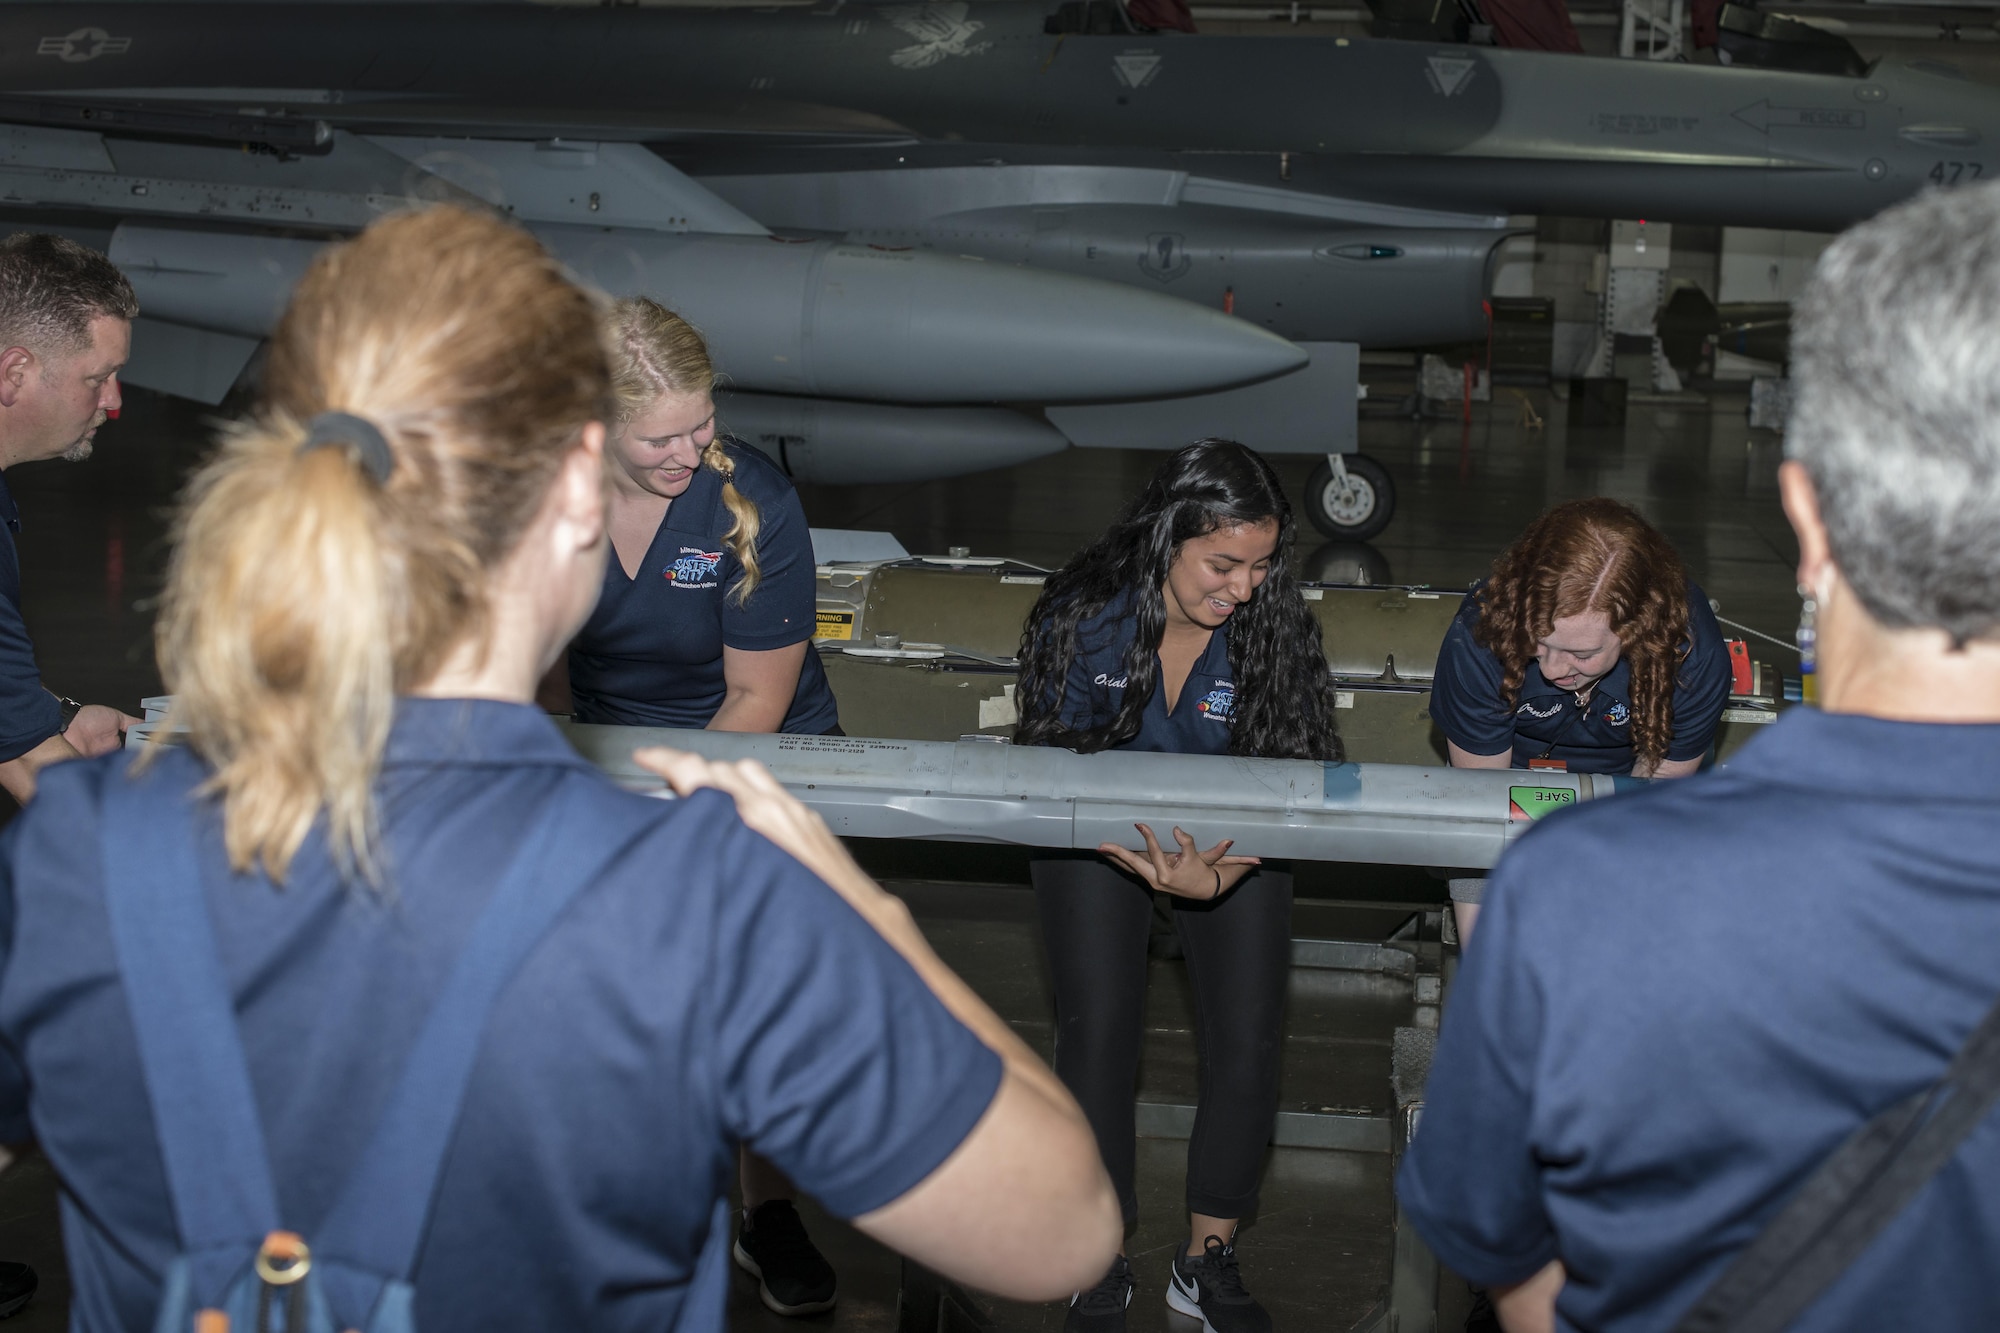 High school students visiting Misawa City with a delegation from Wenatchee Valley, Washington, attempt to lift an F-16 Fighting Falcon’s missile during their tour of Misawa Air Base, Japan, Aug. 24, 2017.